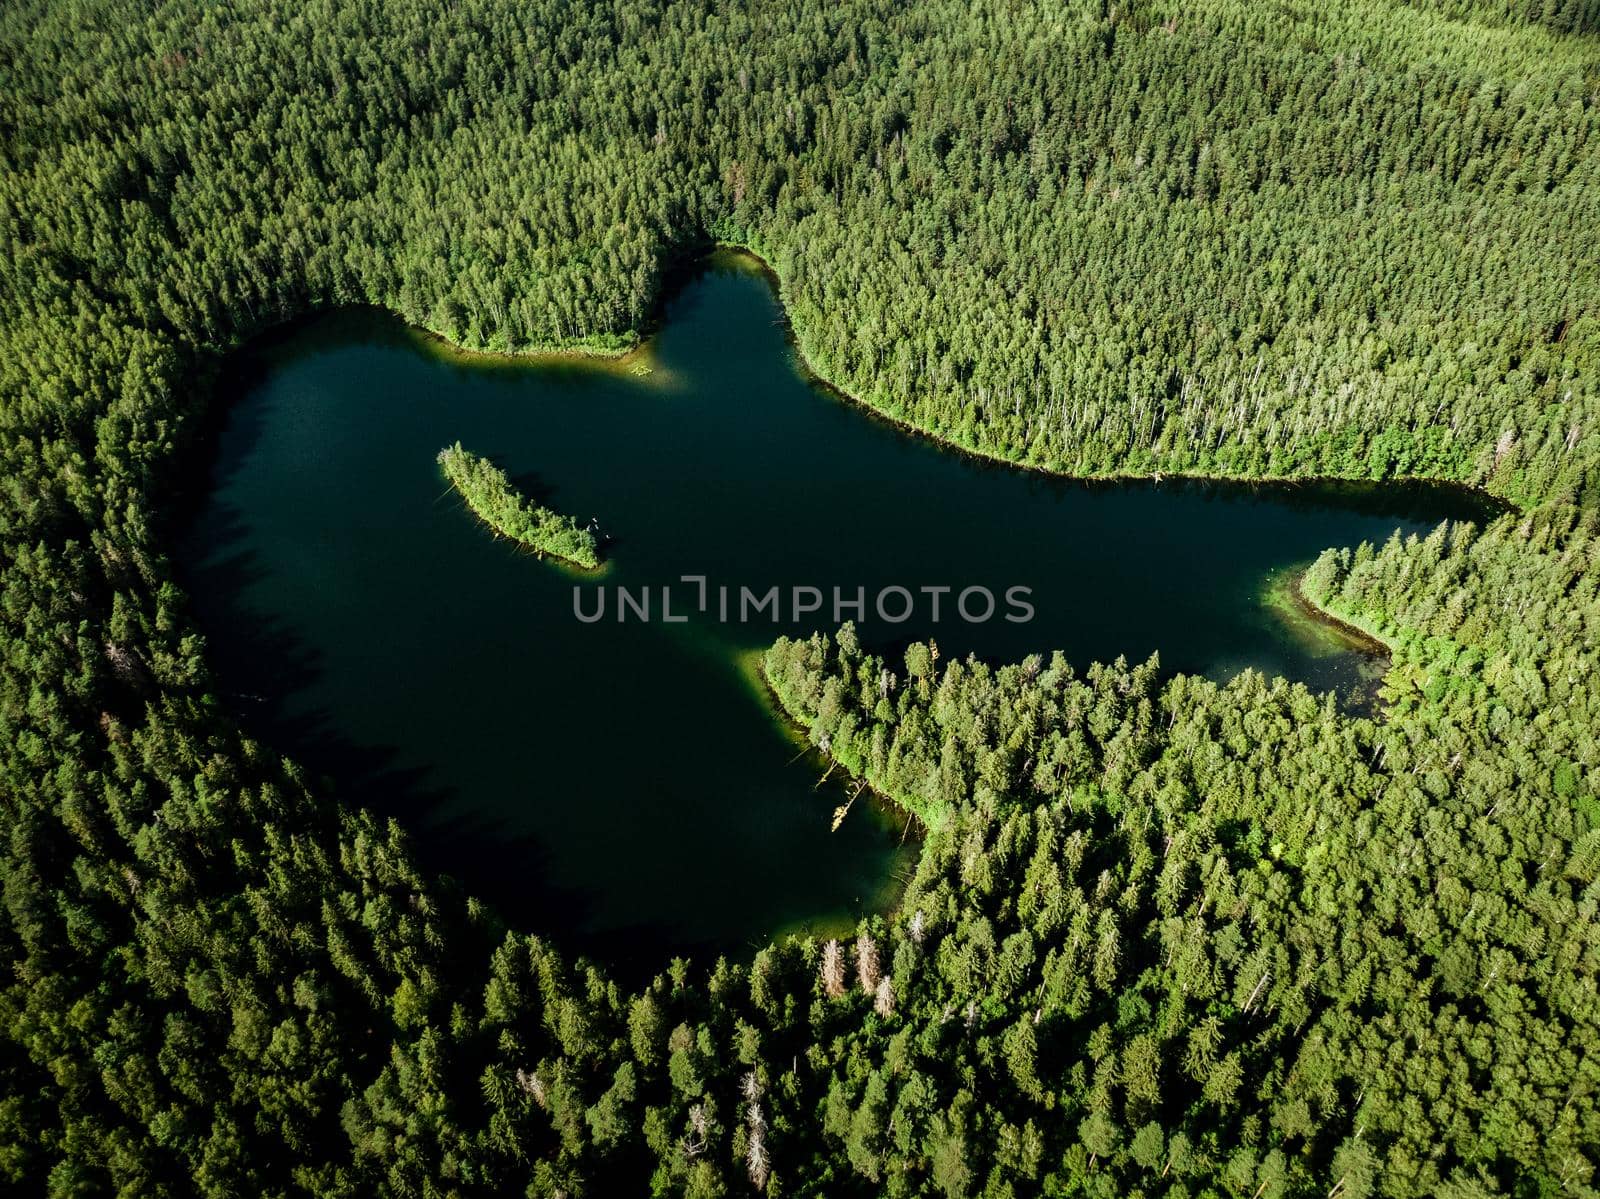 Top view of a forest lake